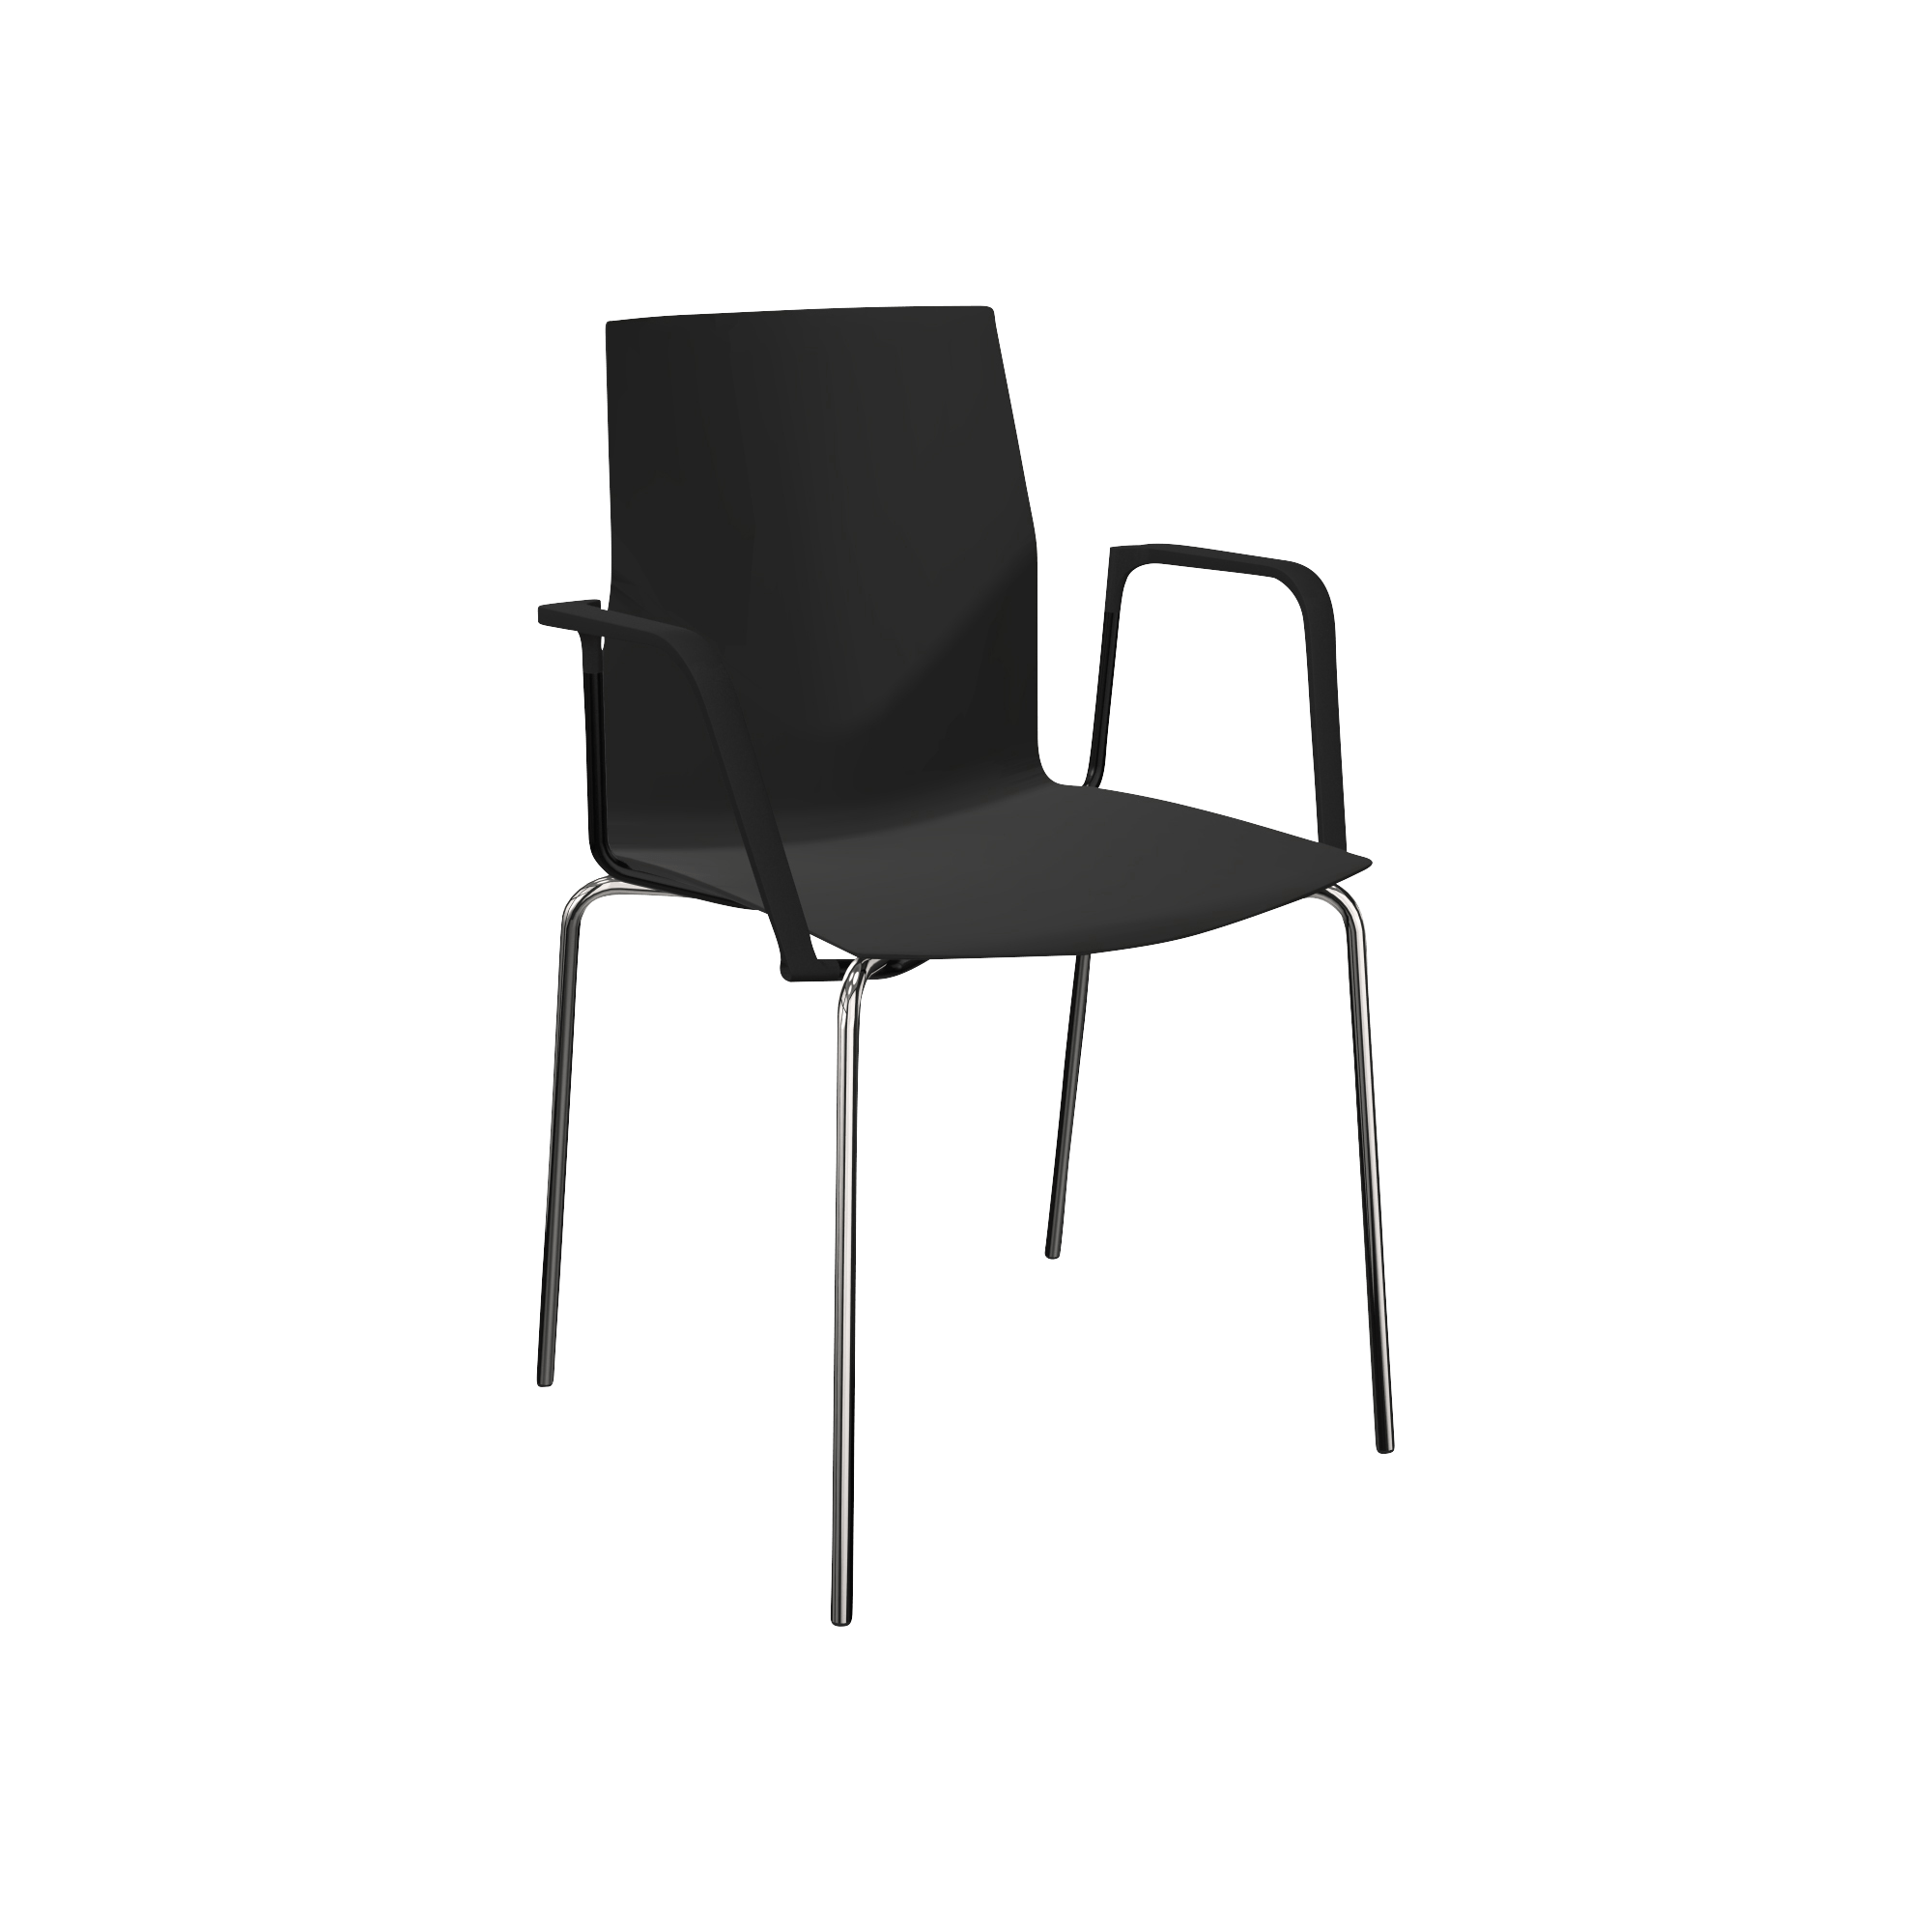 black chair with metal legs and arm rests